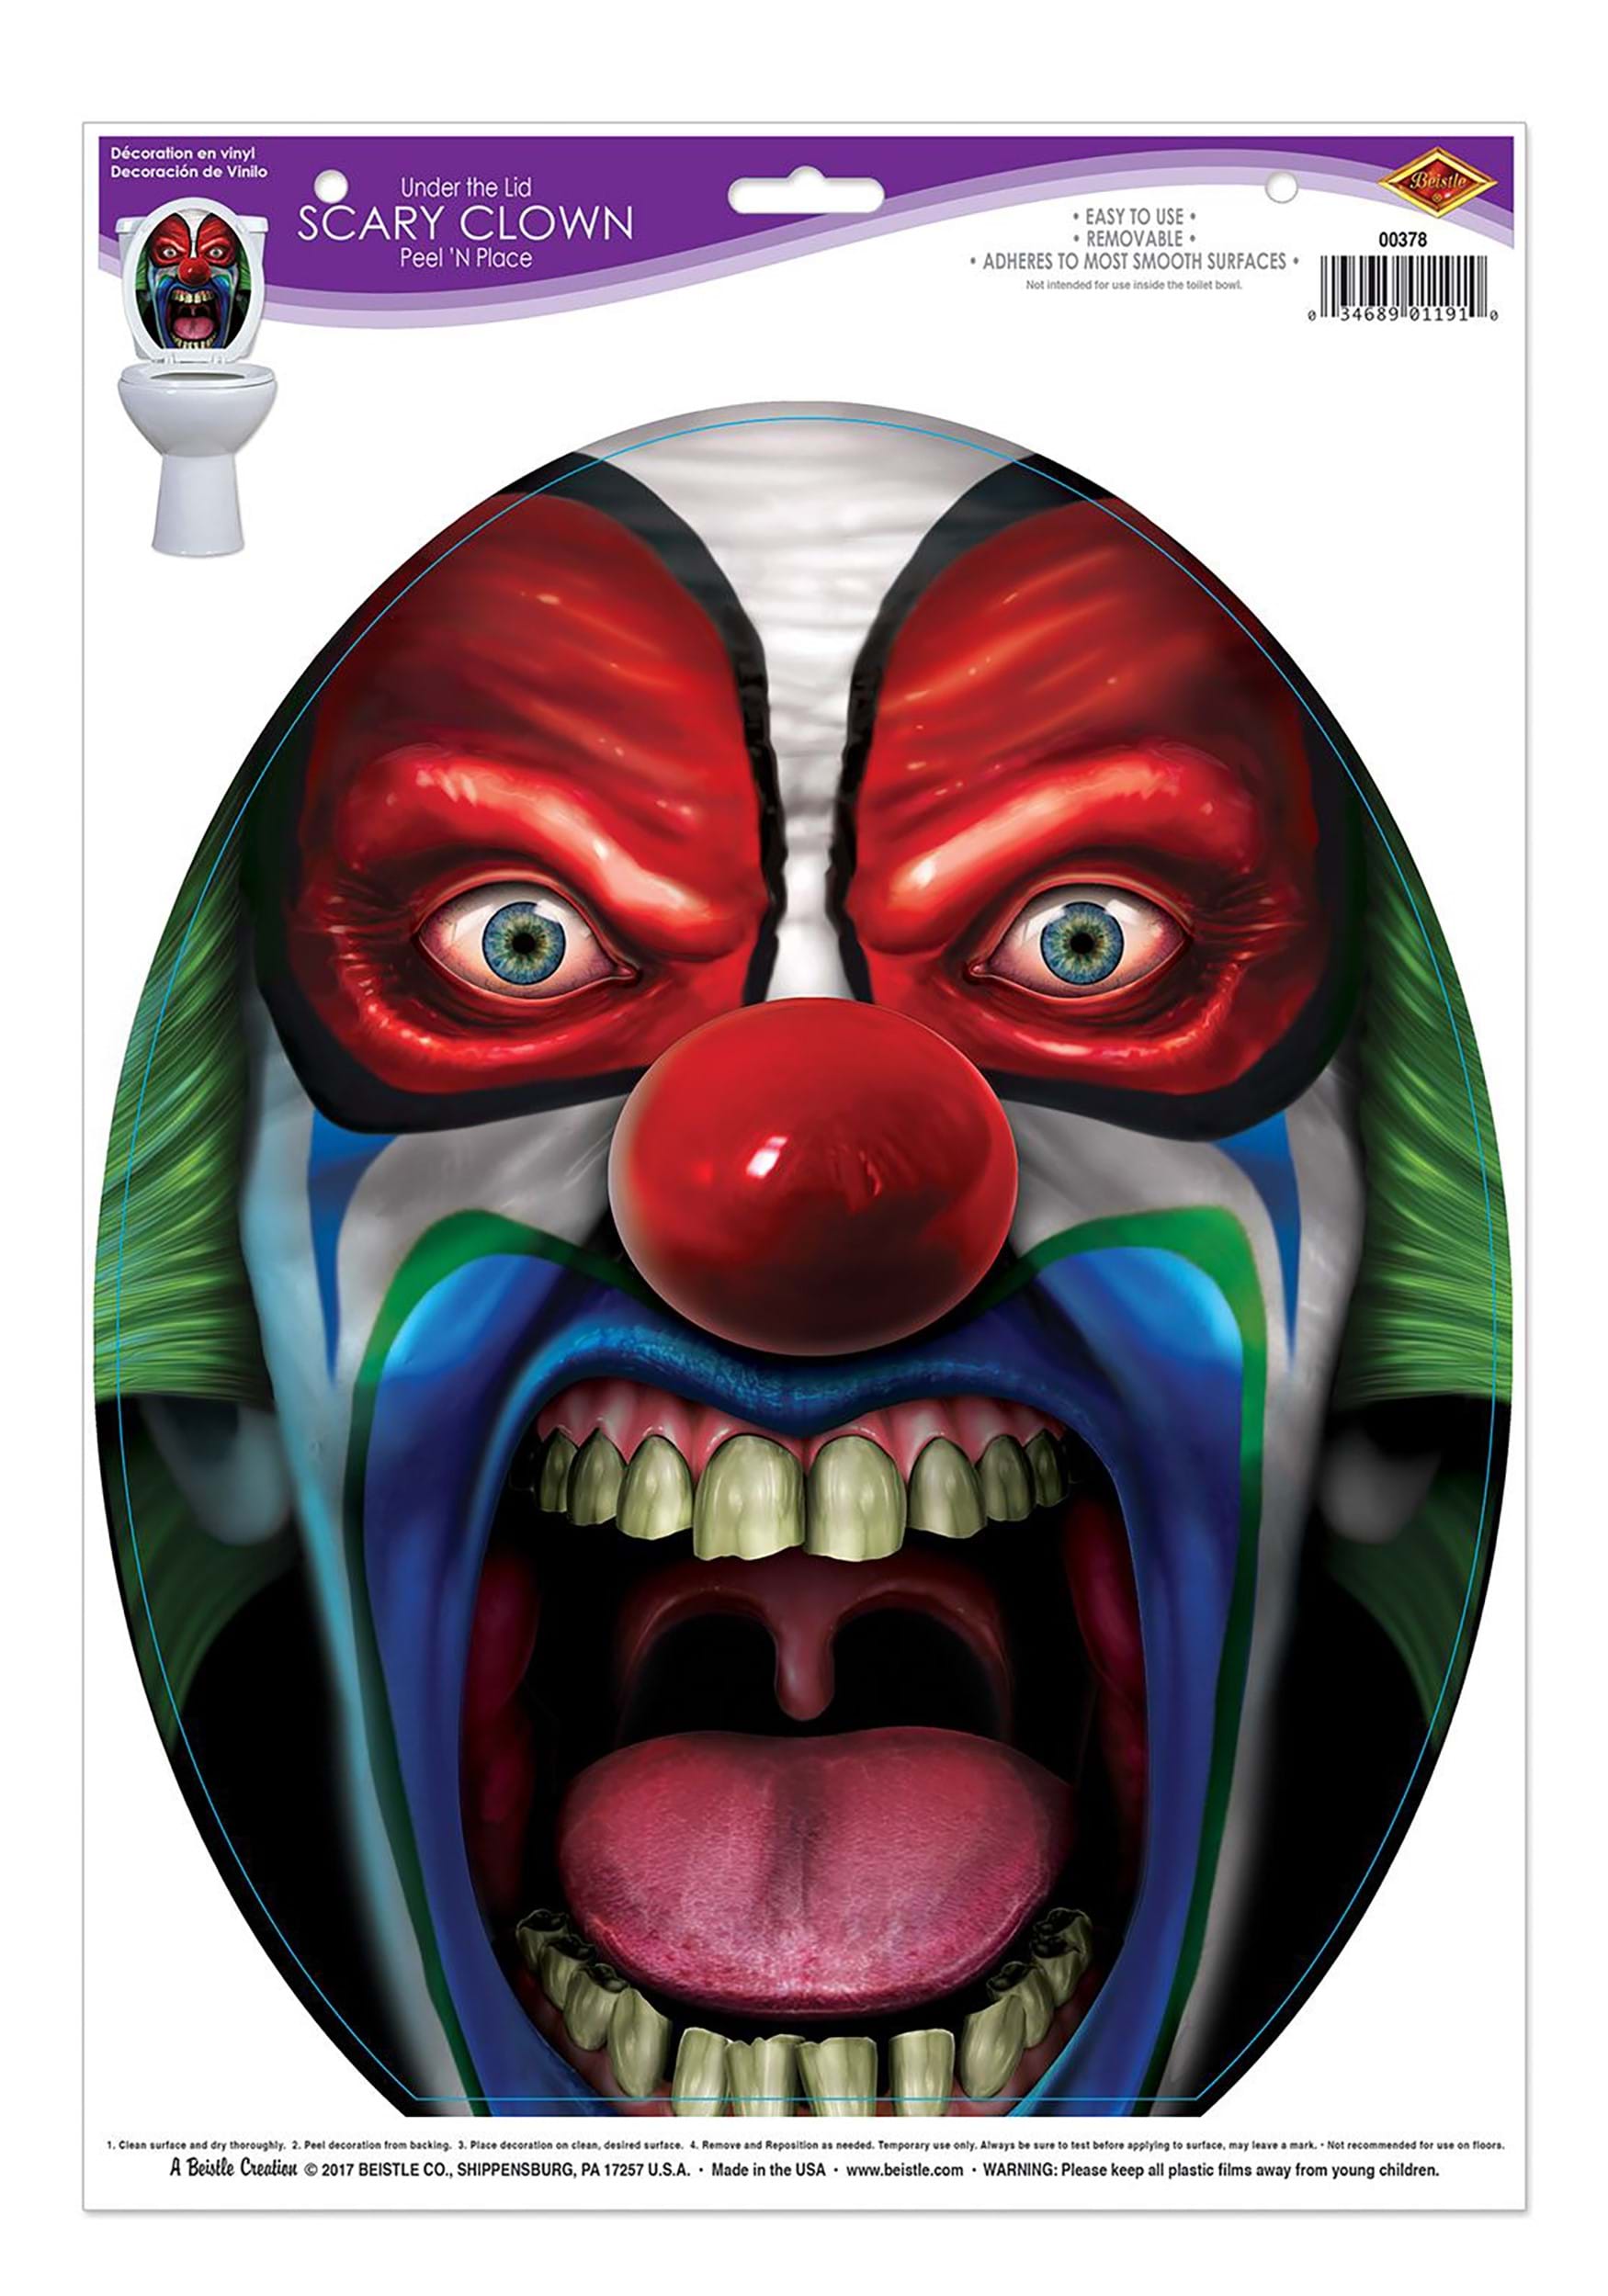 Under the Lid Scary Clown Peel ‘N Place Decal Decoration